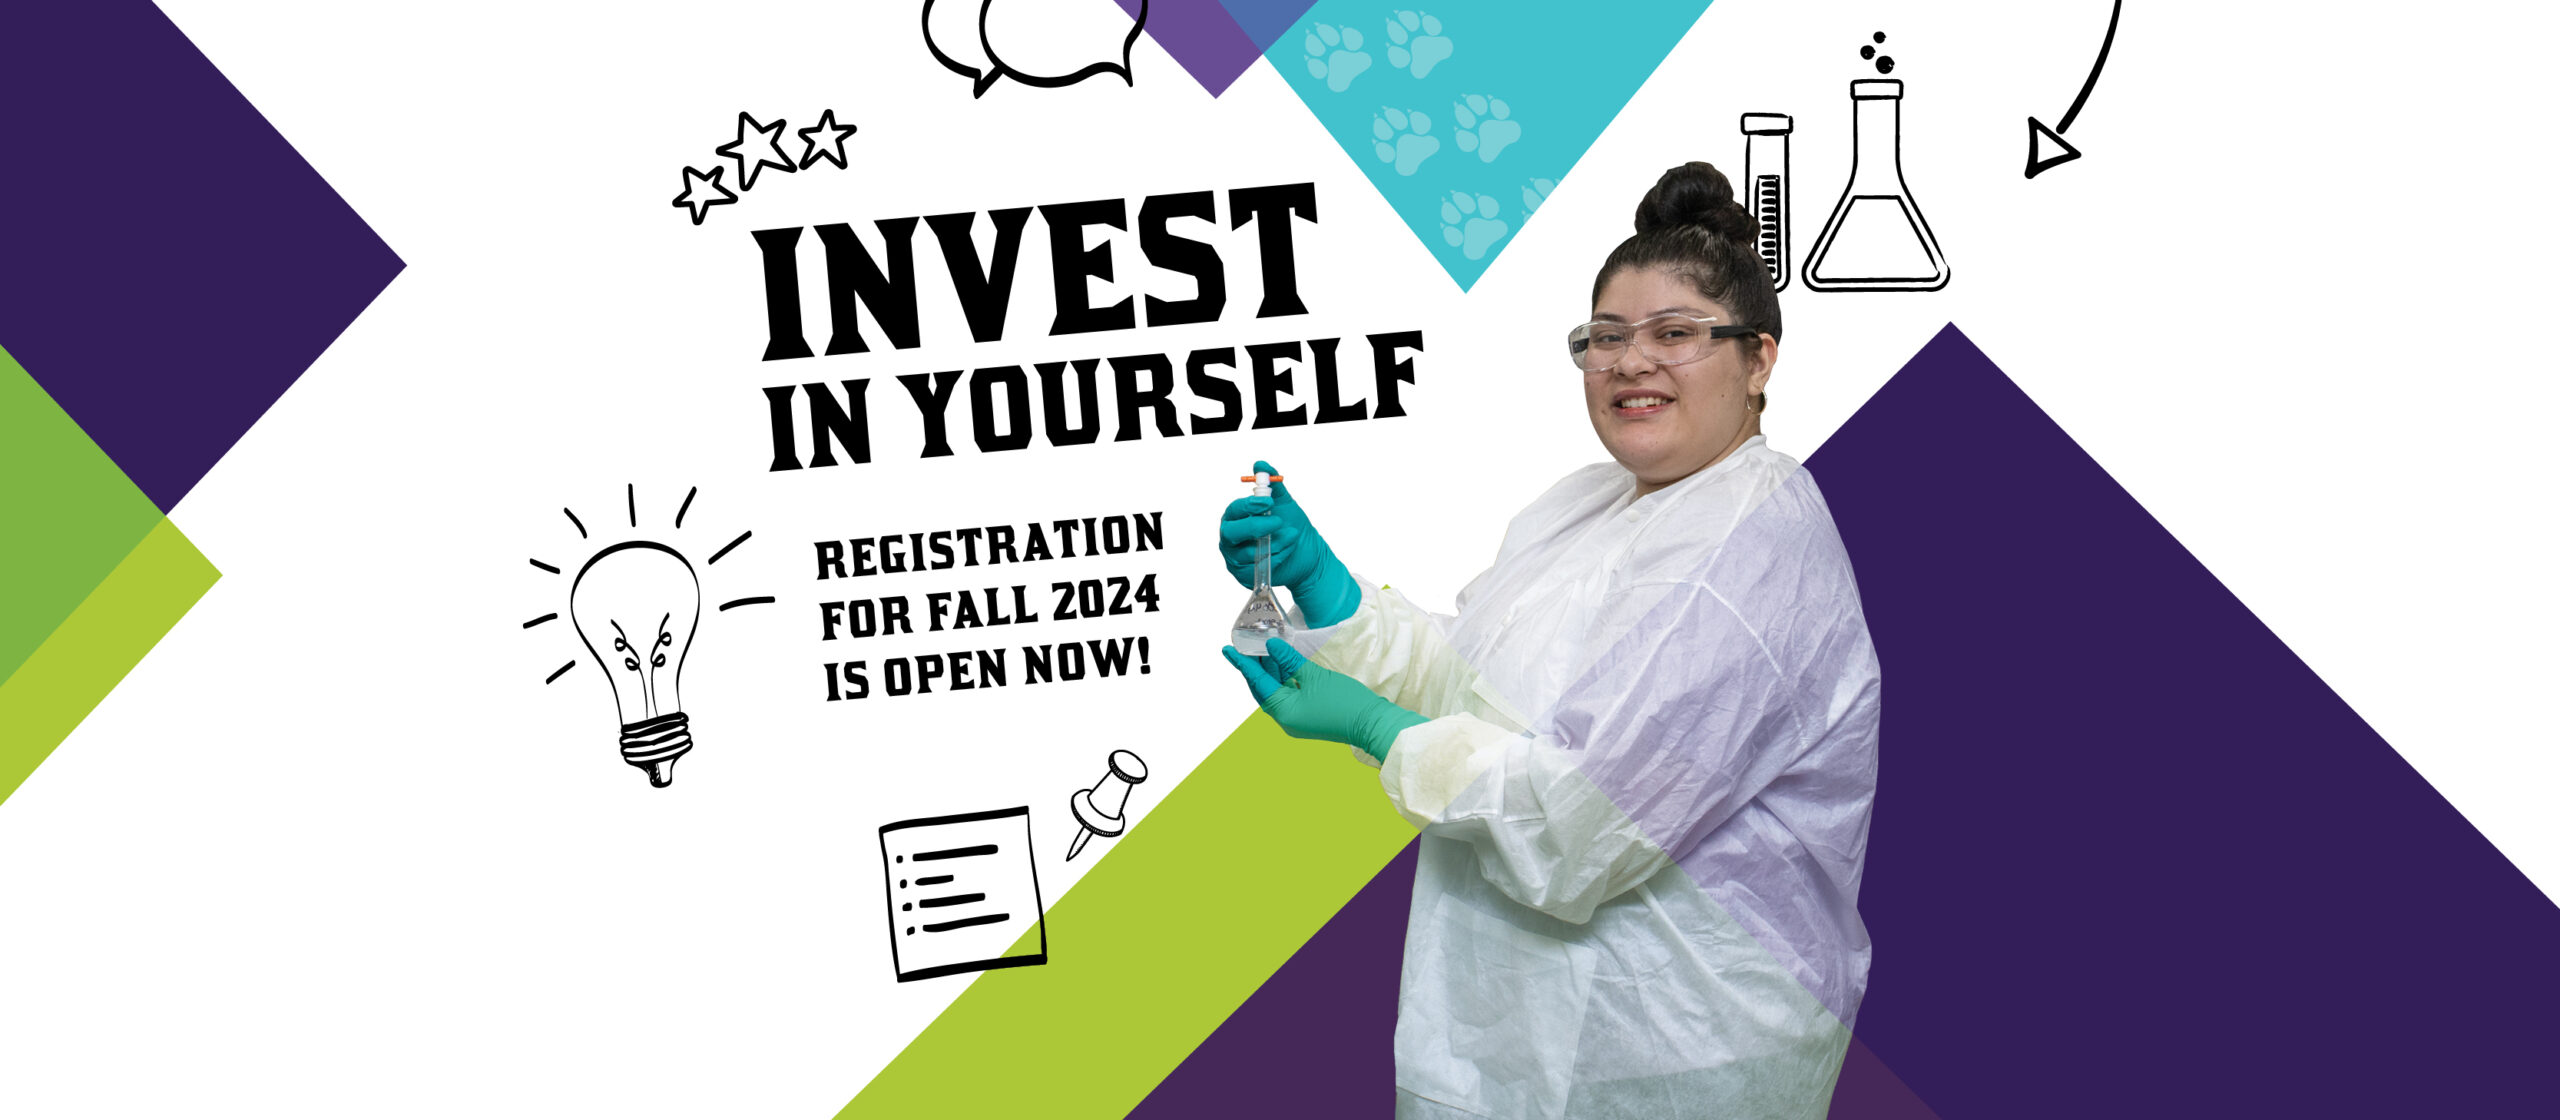 Invest in yourself! Registration for fall 2024 is open now! 